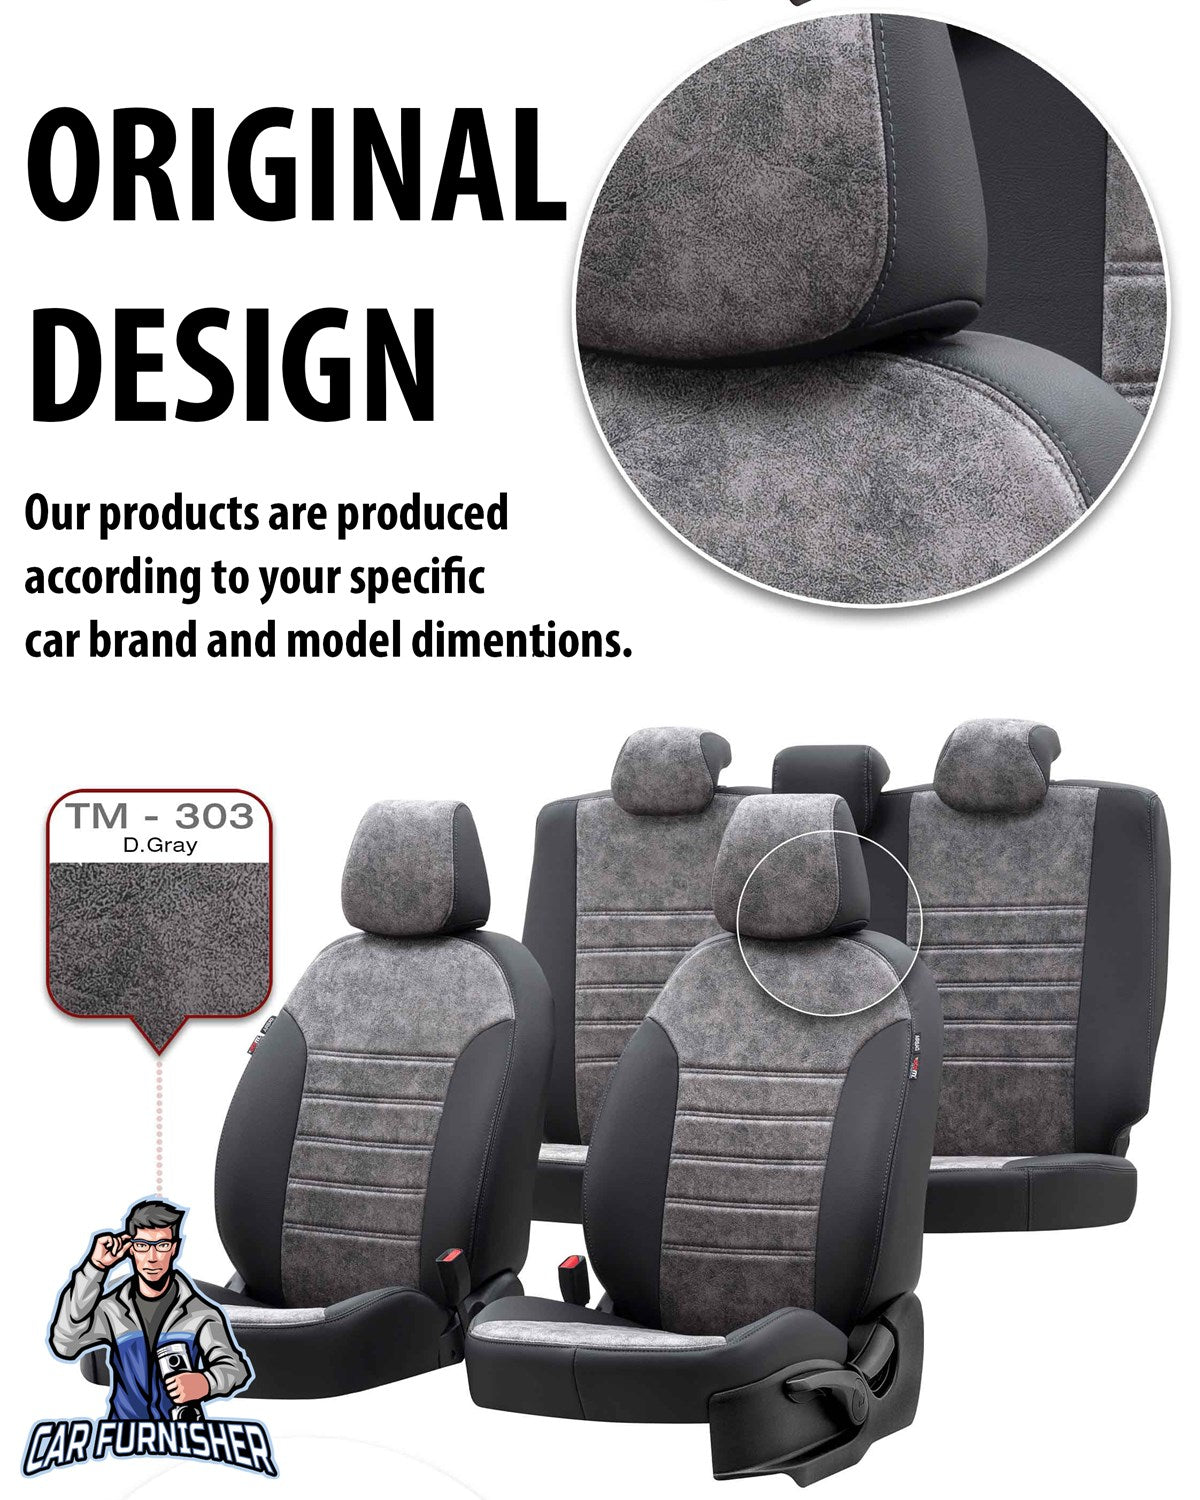 Opel Movano Car Seat Covers 2010-2019 Milano Design Black Leather & Fabric